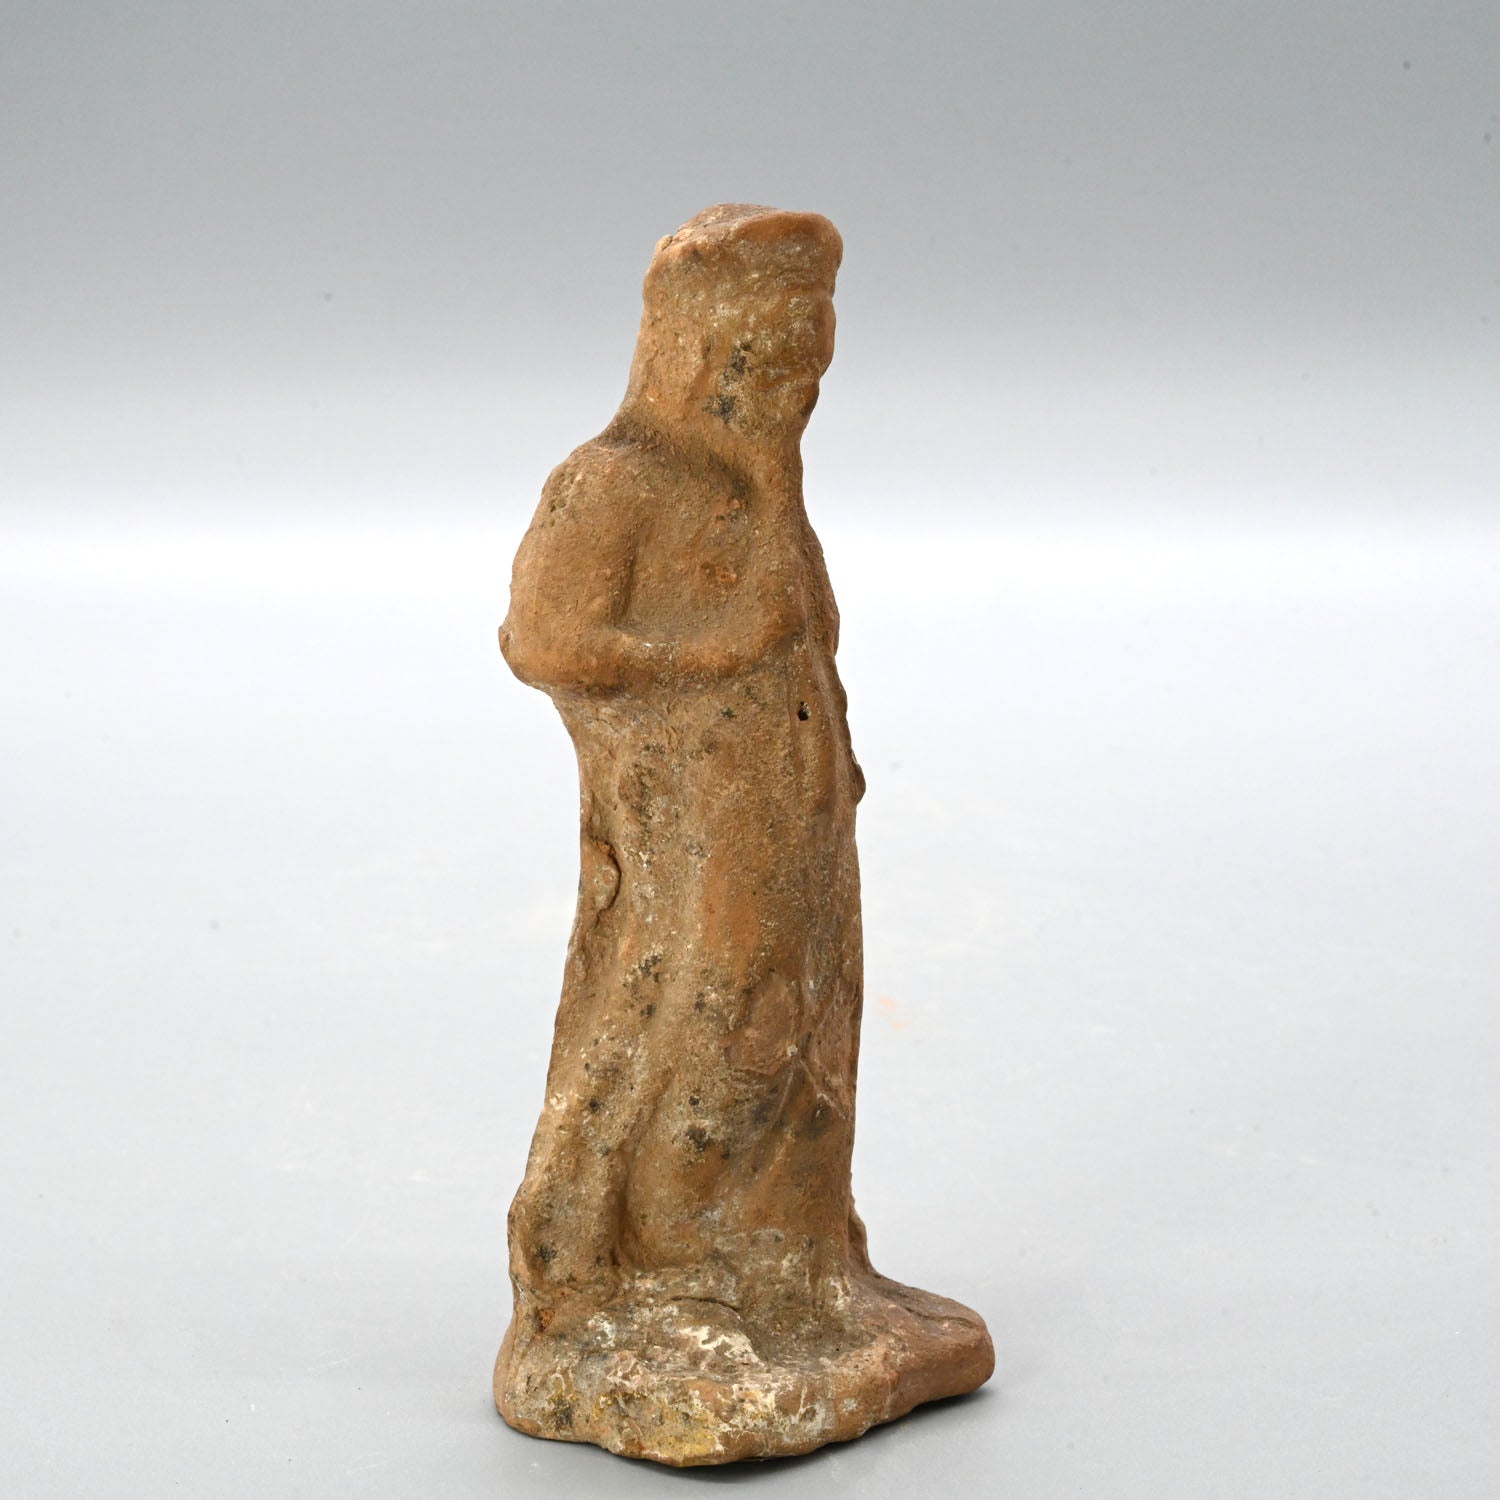 An Attic terracotta figurine of a Girl playing Auloi (double pipes)<br><em>Tanagra, ca. 3rd century BCE</em>